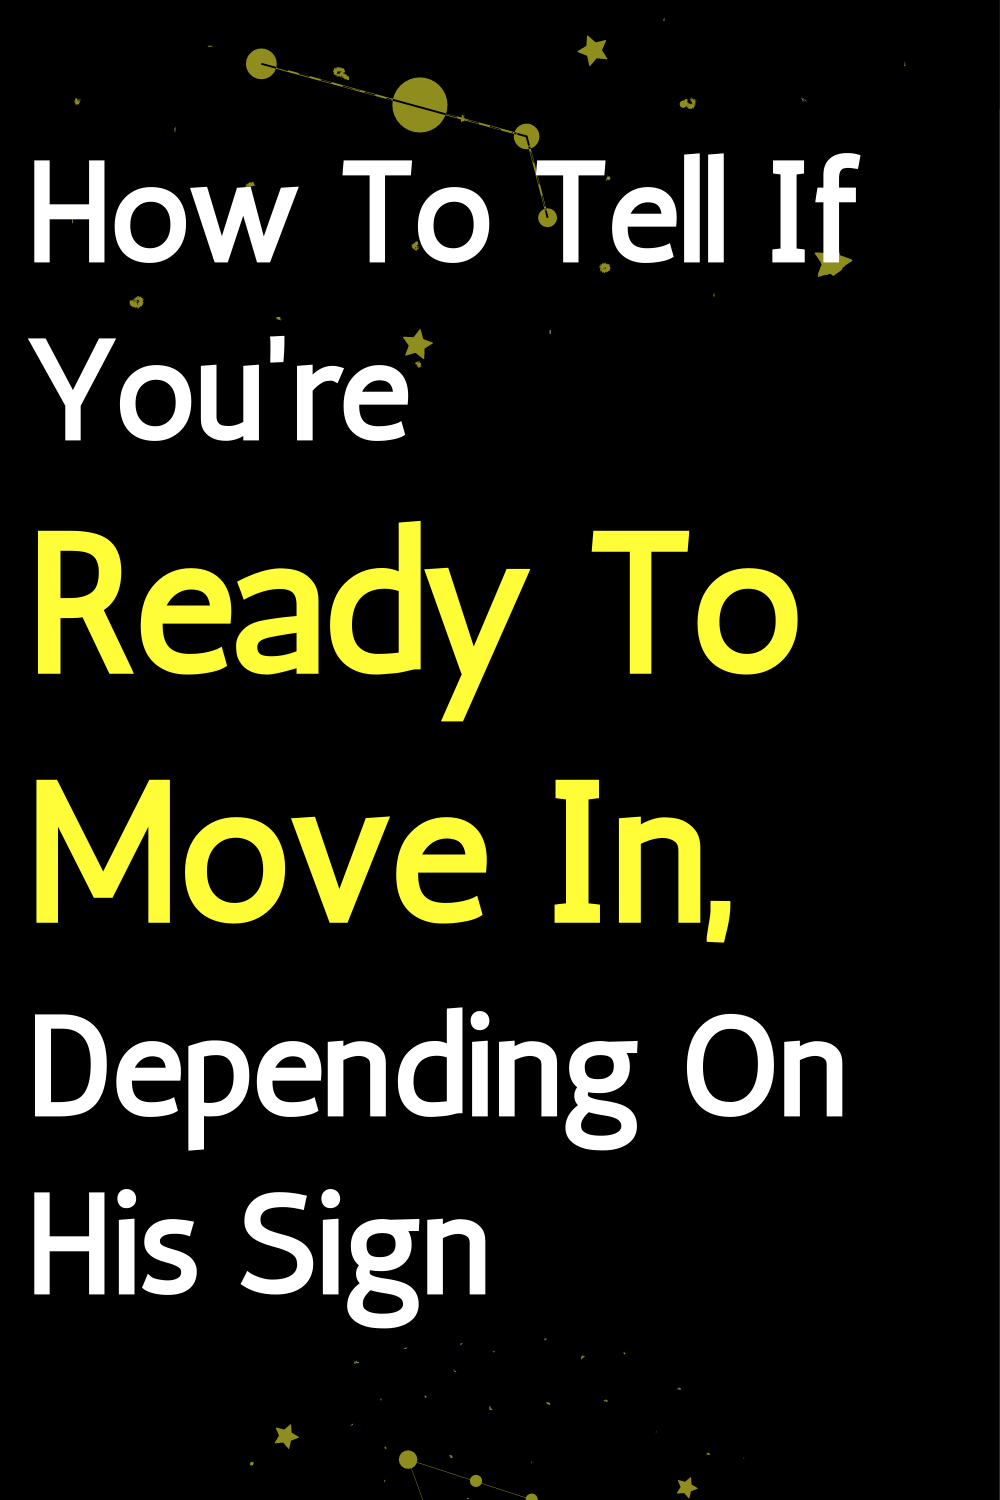 How To Tell If You're Ready To Move In, Depending On His Sign